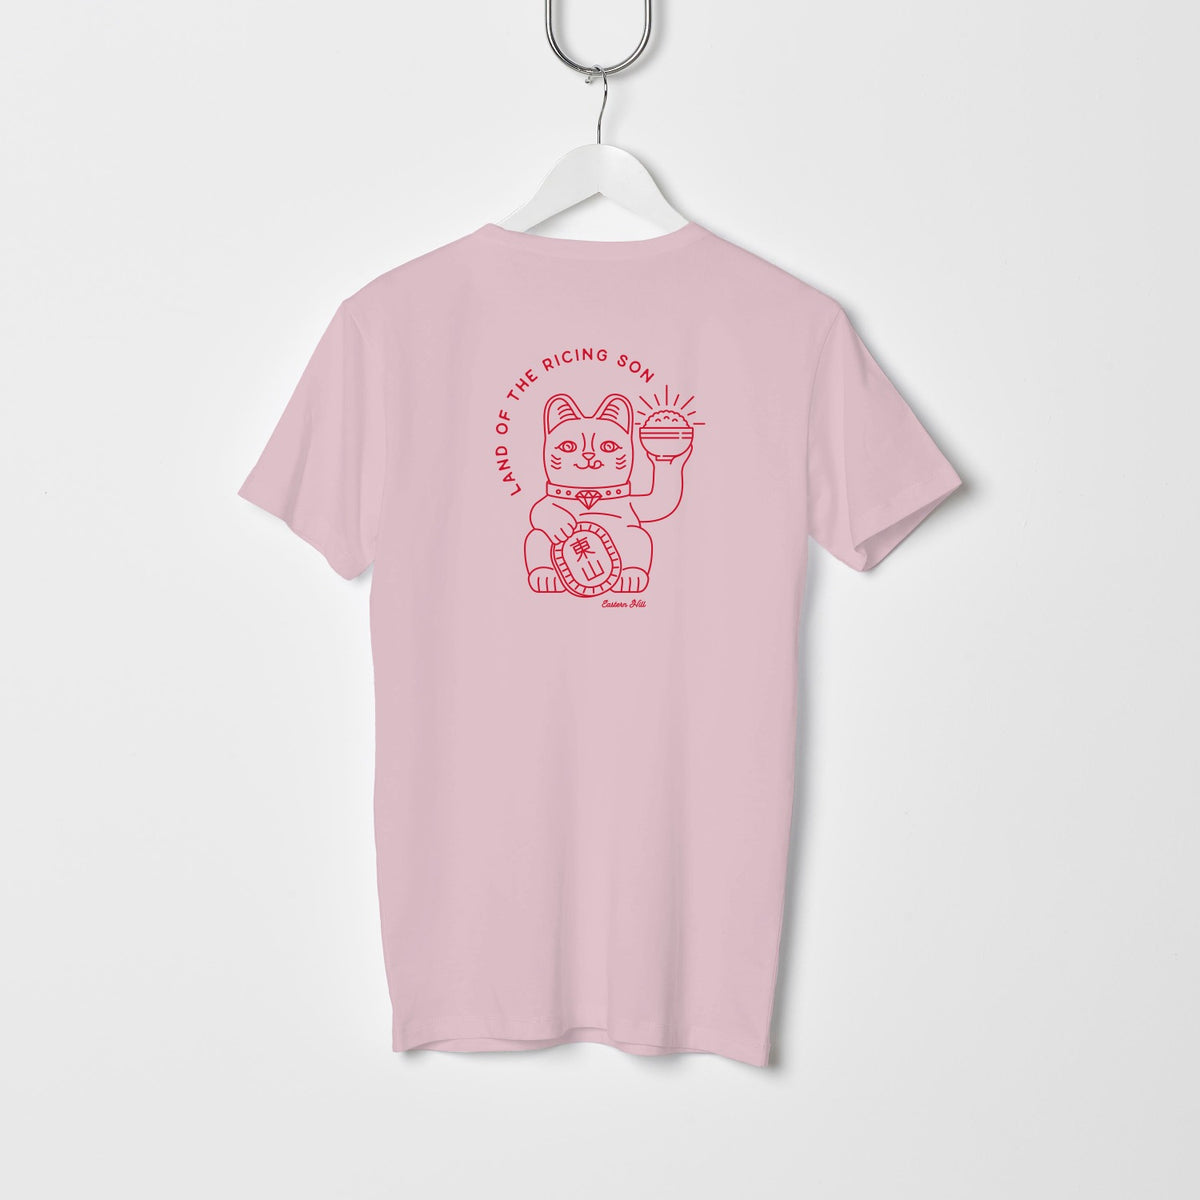 Eastern Hill General Supplies Land of the Ricing Son Tee - Pink/Red